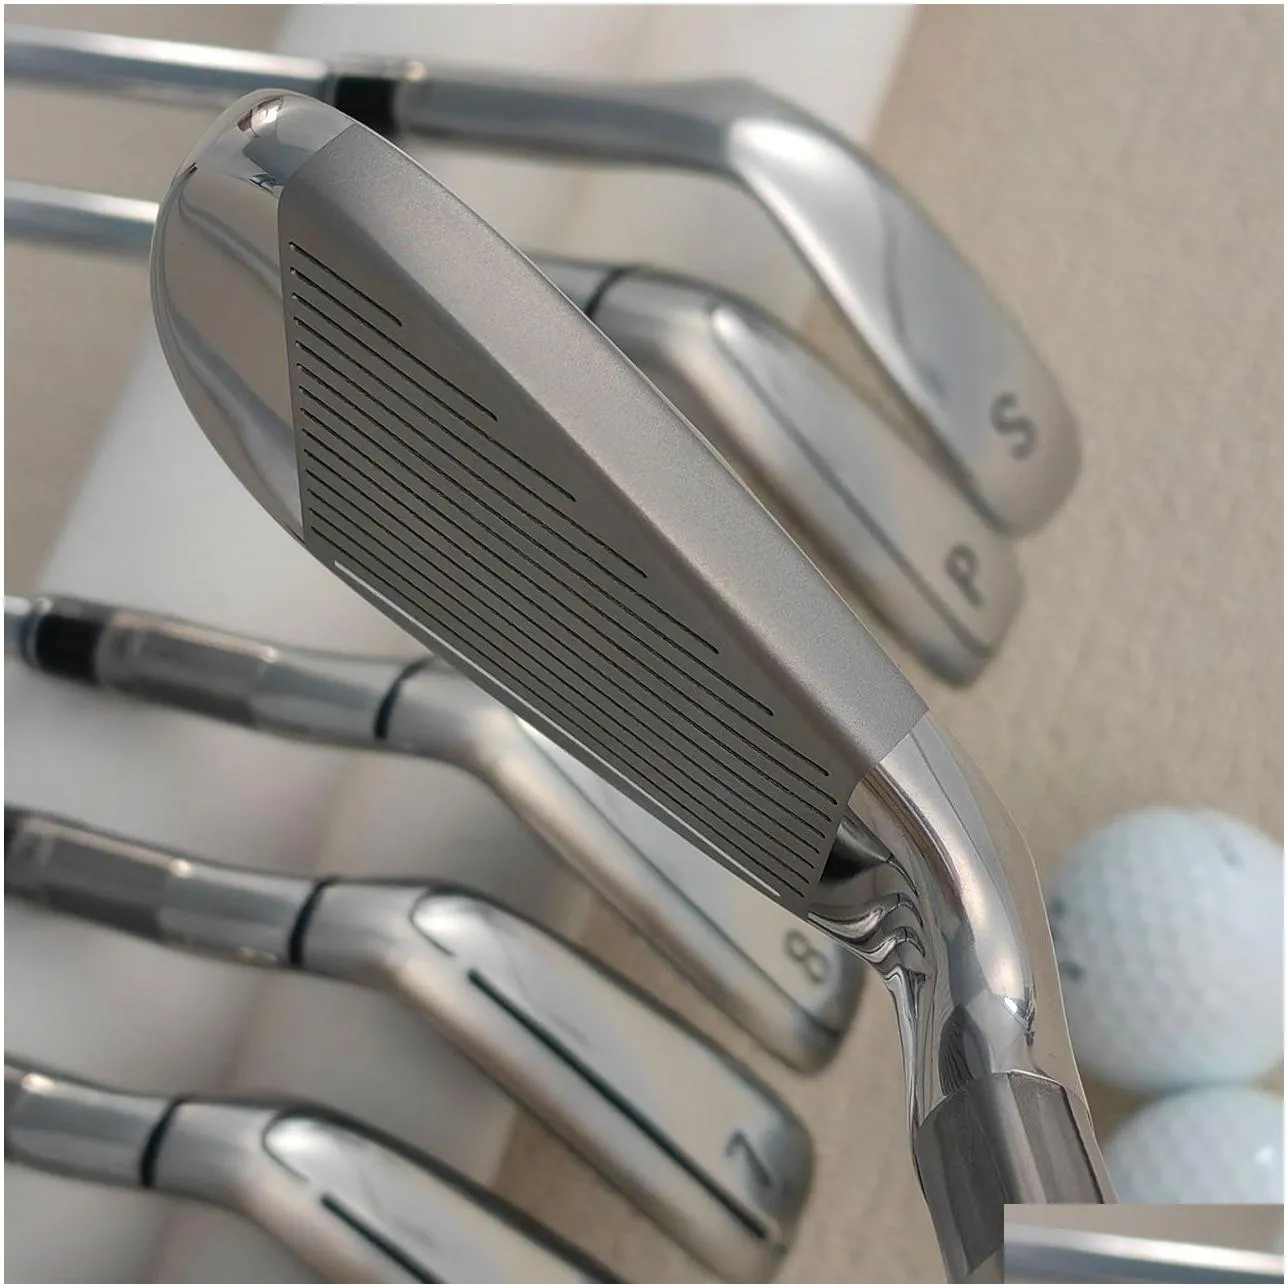 New M6 Golf Iron Set - Right-Handed Irons Include 4, 5, 6, 7, 8, 9, PS - Easy to Hit Golf Irons